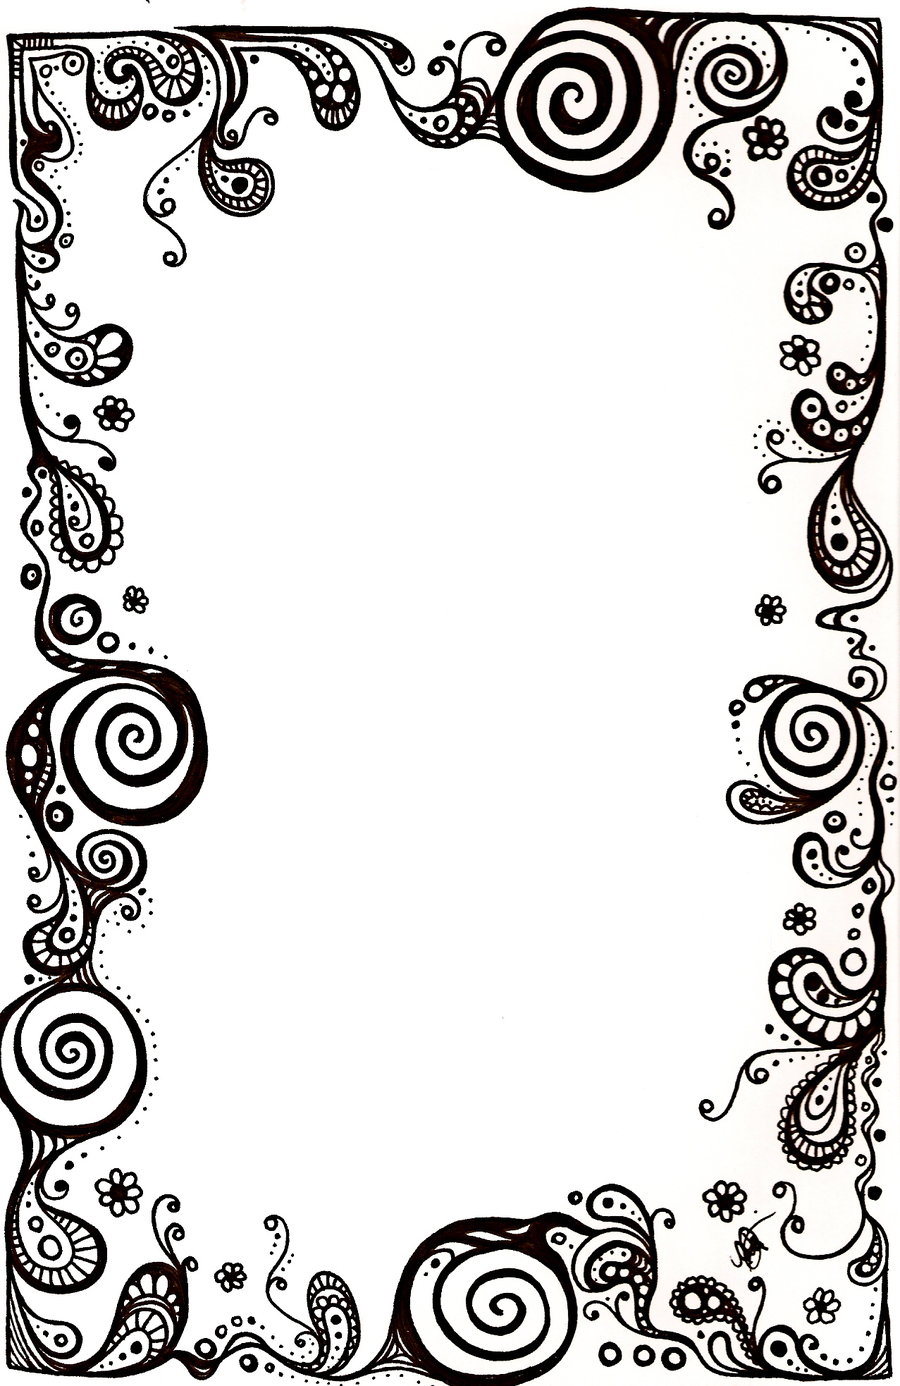 Blank Border by ak-attack on Clipart library